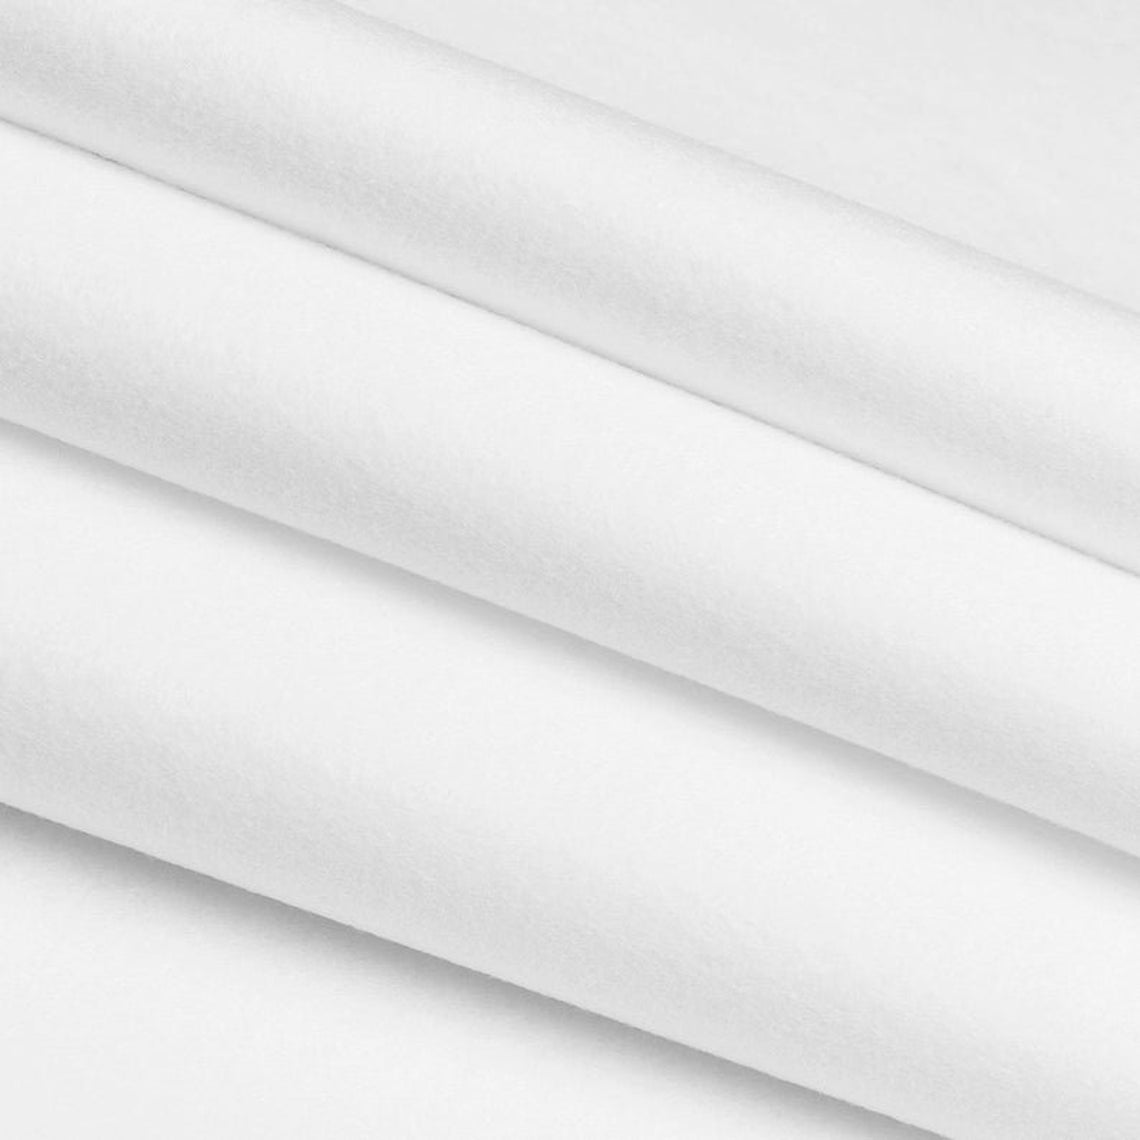 72" Wide 1.6 mm Thick Acrylic White Felt Fabric By The YardICE FABRICSICE FABRICSPer Yard1.6mm Thick72" Wide 1.6 mm Thick Acrylic White Felt Fabric By The Yard ICE FABRICS